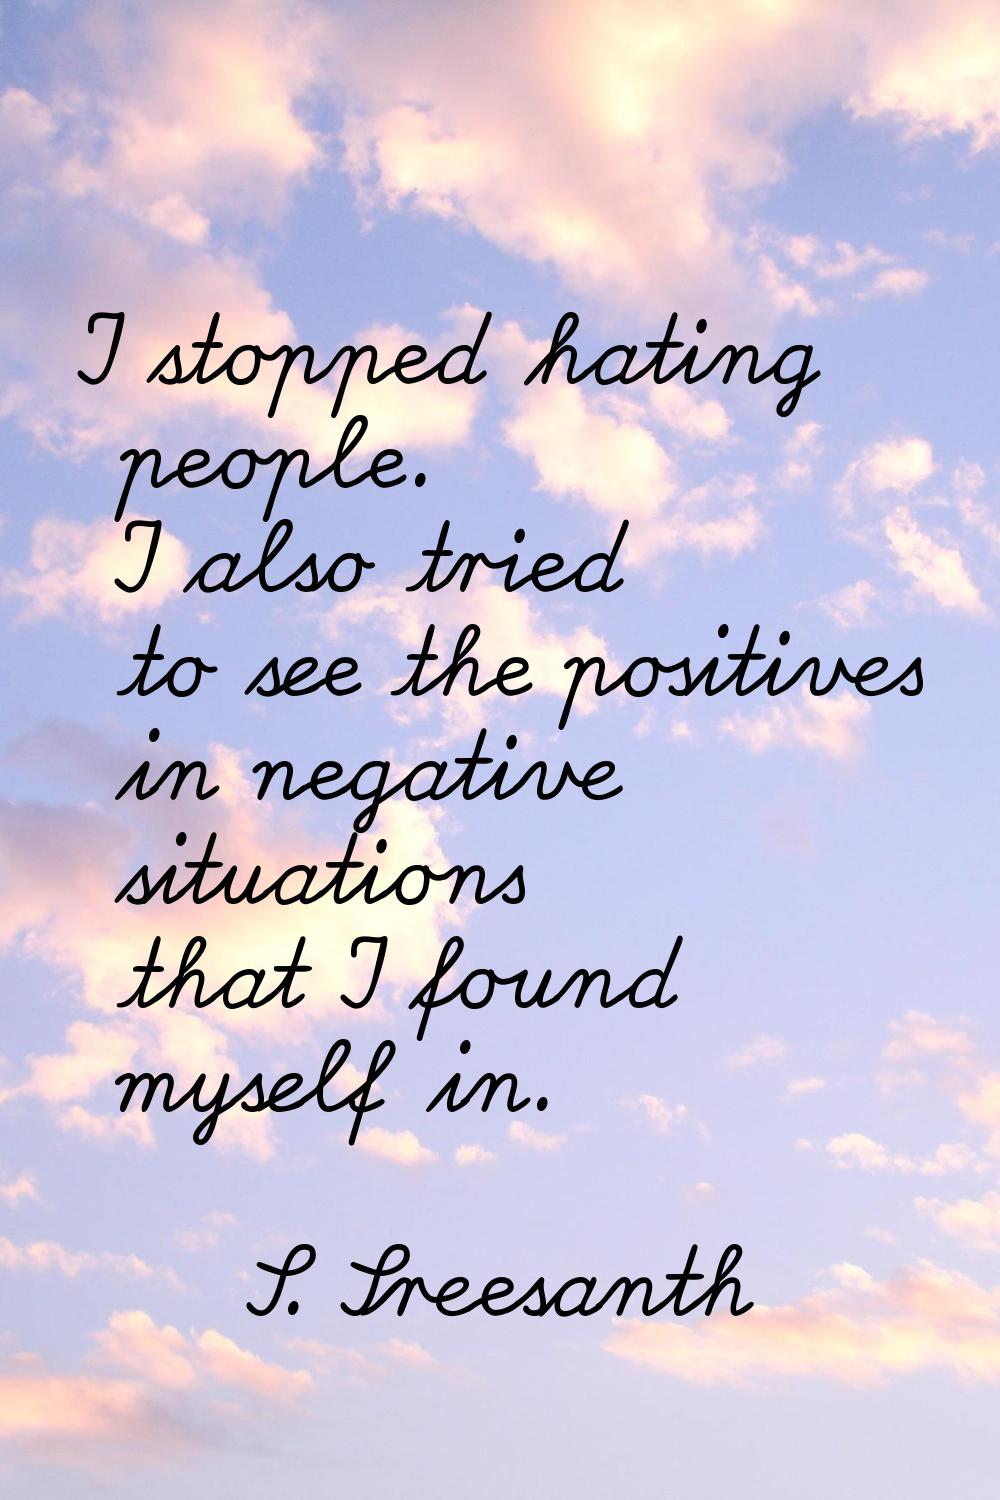 I stopped hating people. I also tried to see the positives in negative situations that I found myse